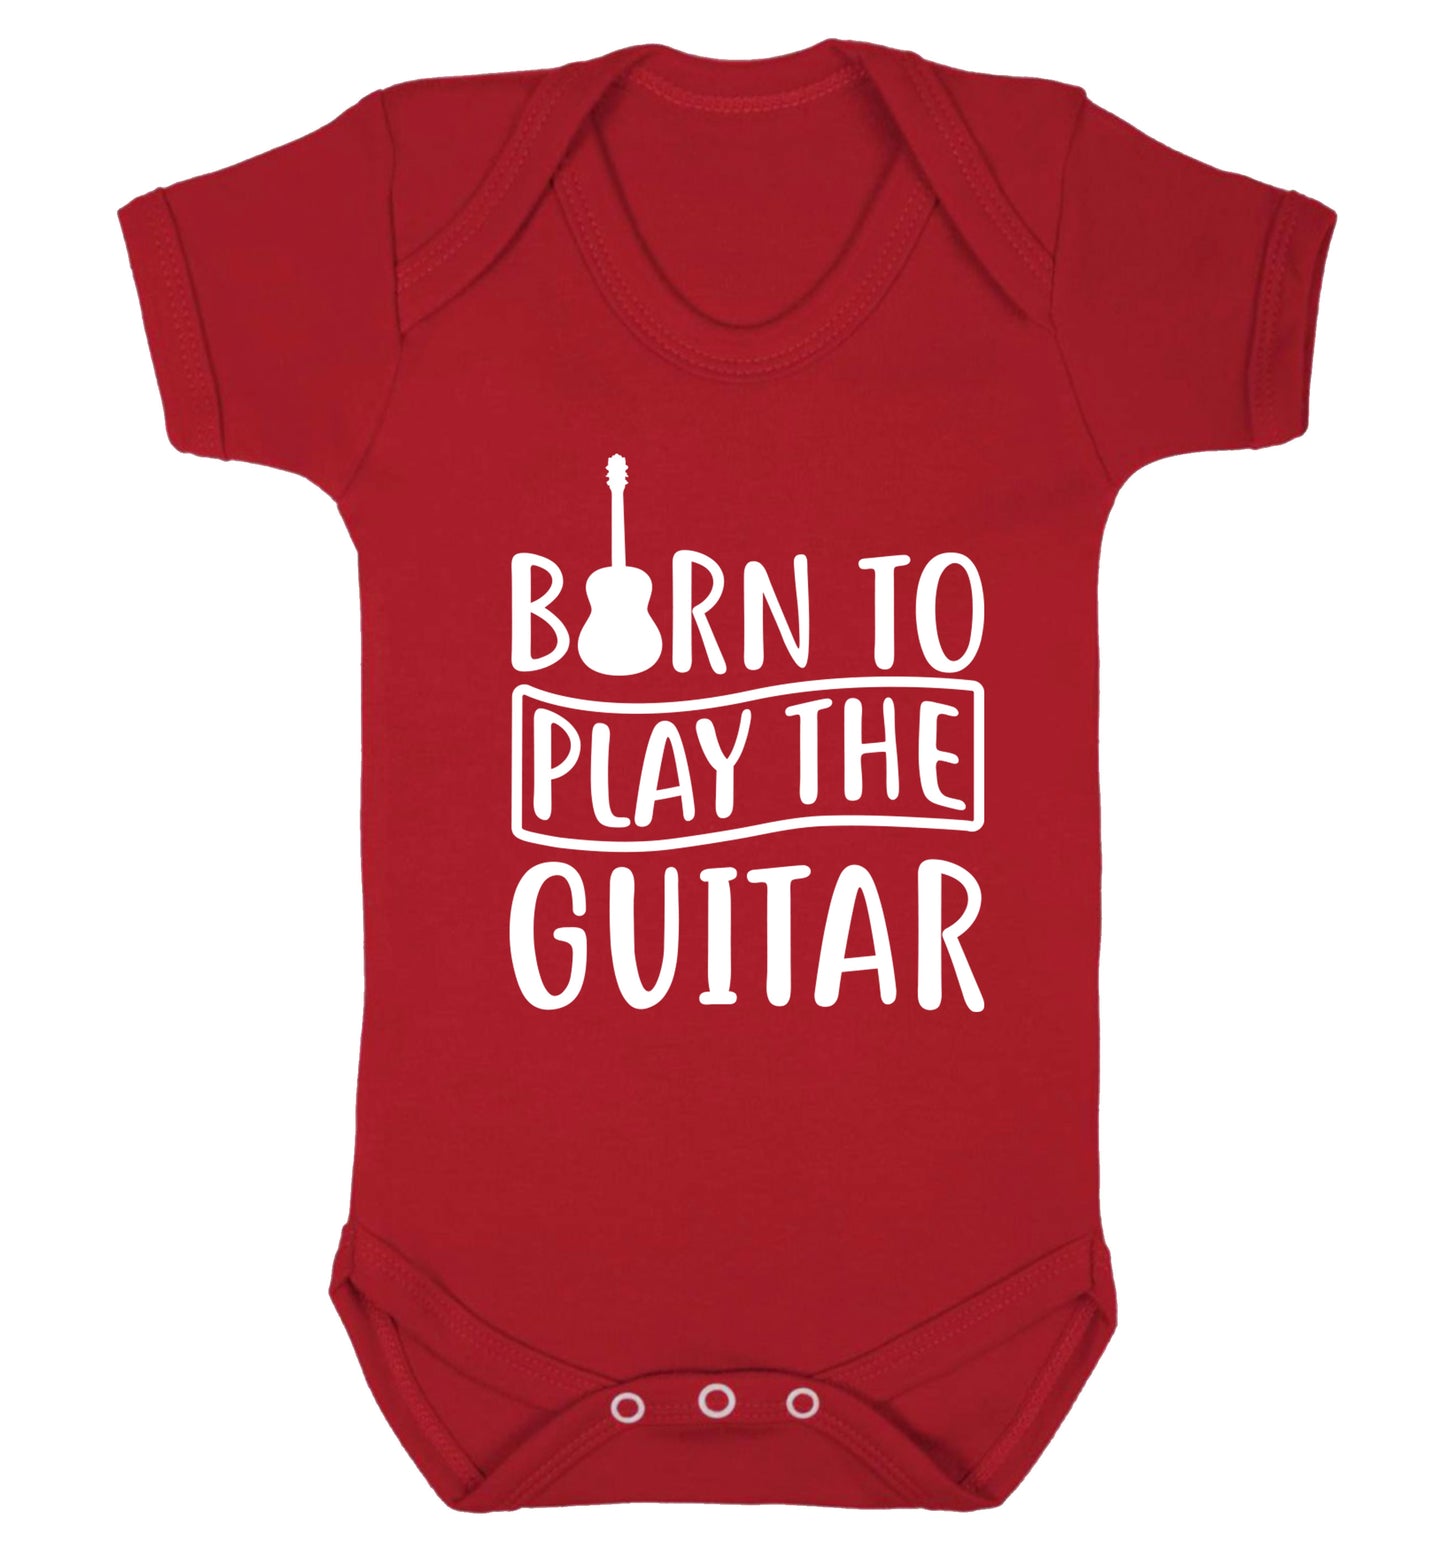 Born to play the guitar Baby Vest red 18-24 months